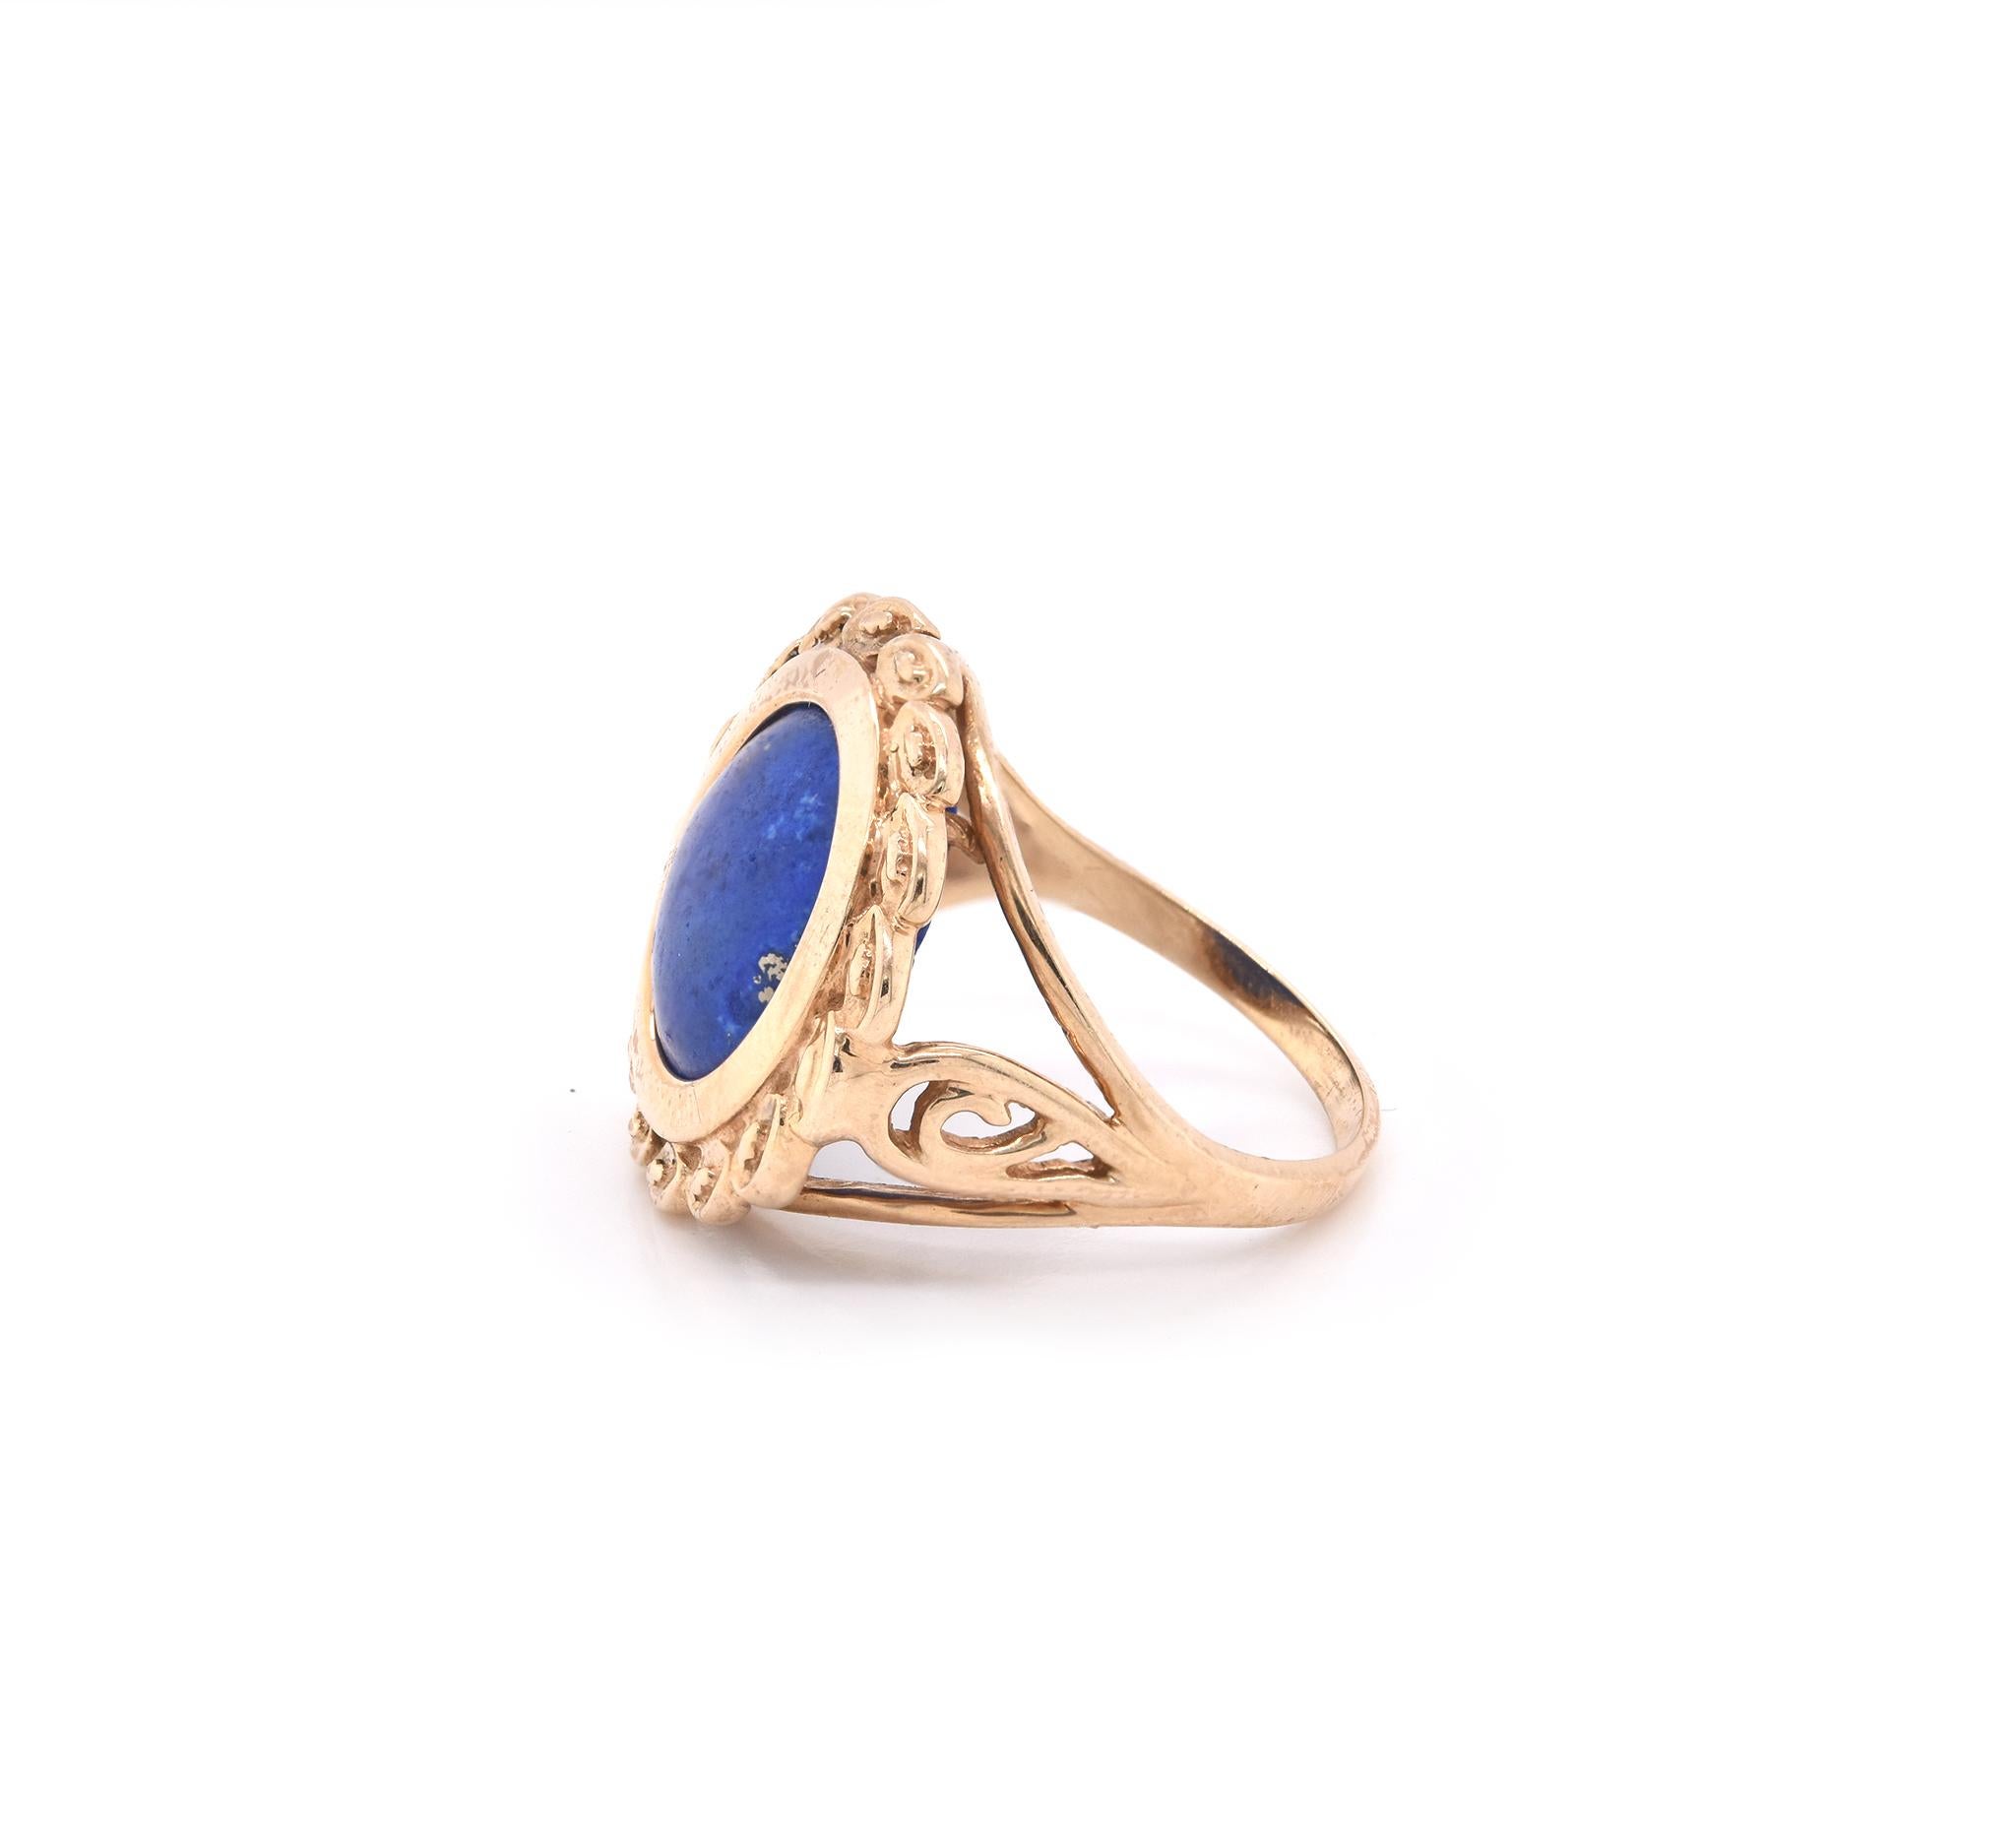 Designer: hallmarked “CID”
Material: 10k yellow gold
Gemstone: 1 cabochon lapis lazuli
Ring Size: 5 ¾ (please allow two additional shipping days for sizing requests)
Dimensions: ring top measures 18.75mm in diameter
Weight: 4.8 grams
